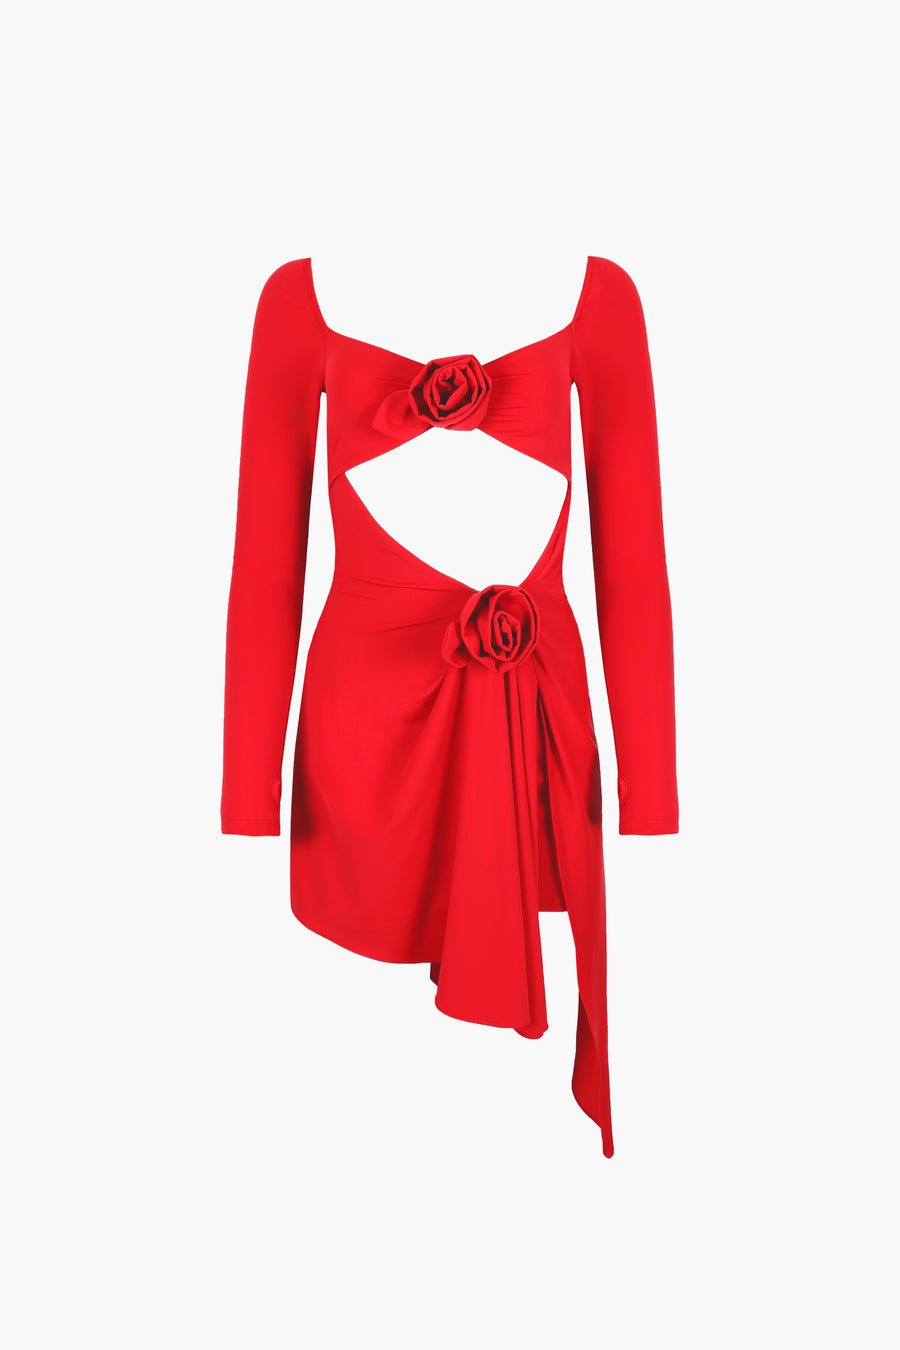 NARCISSA DRESS IN RED